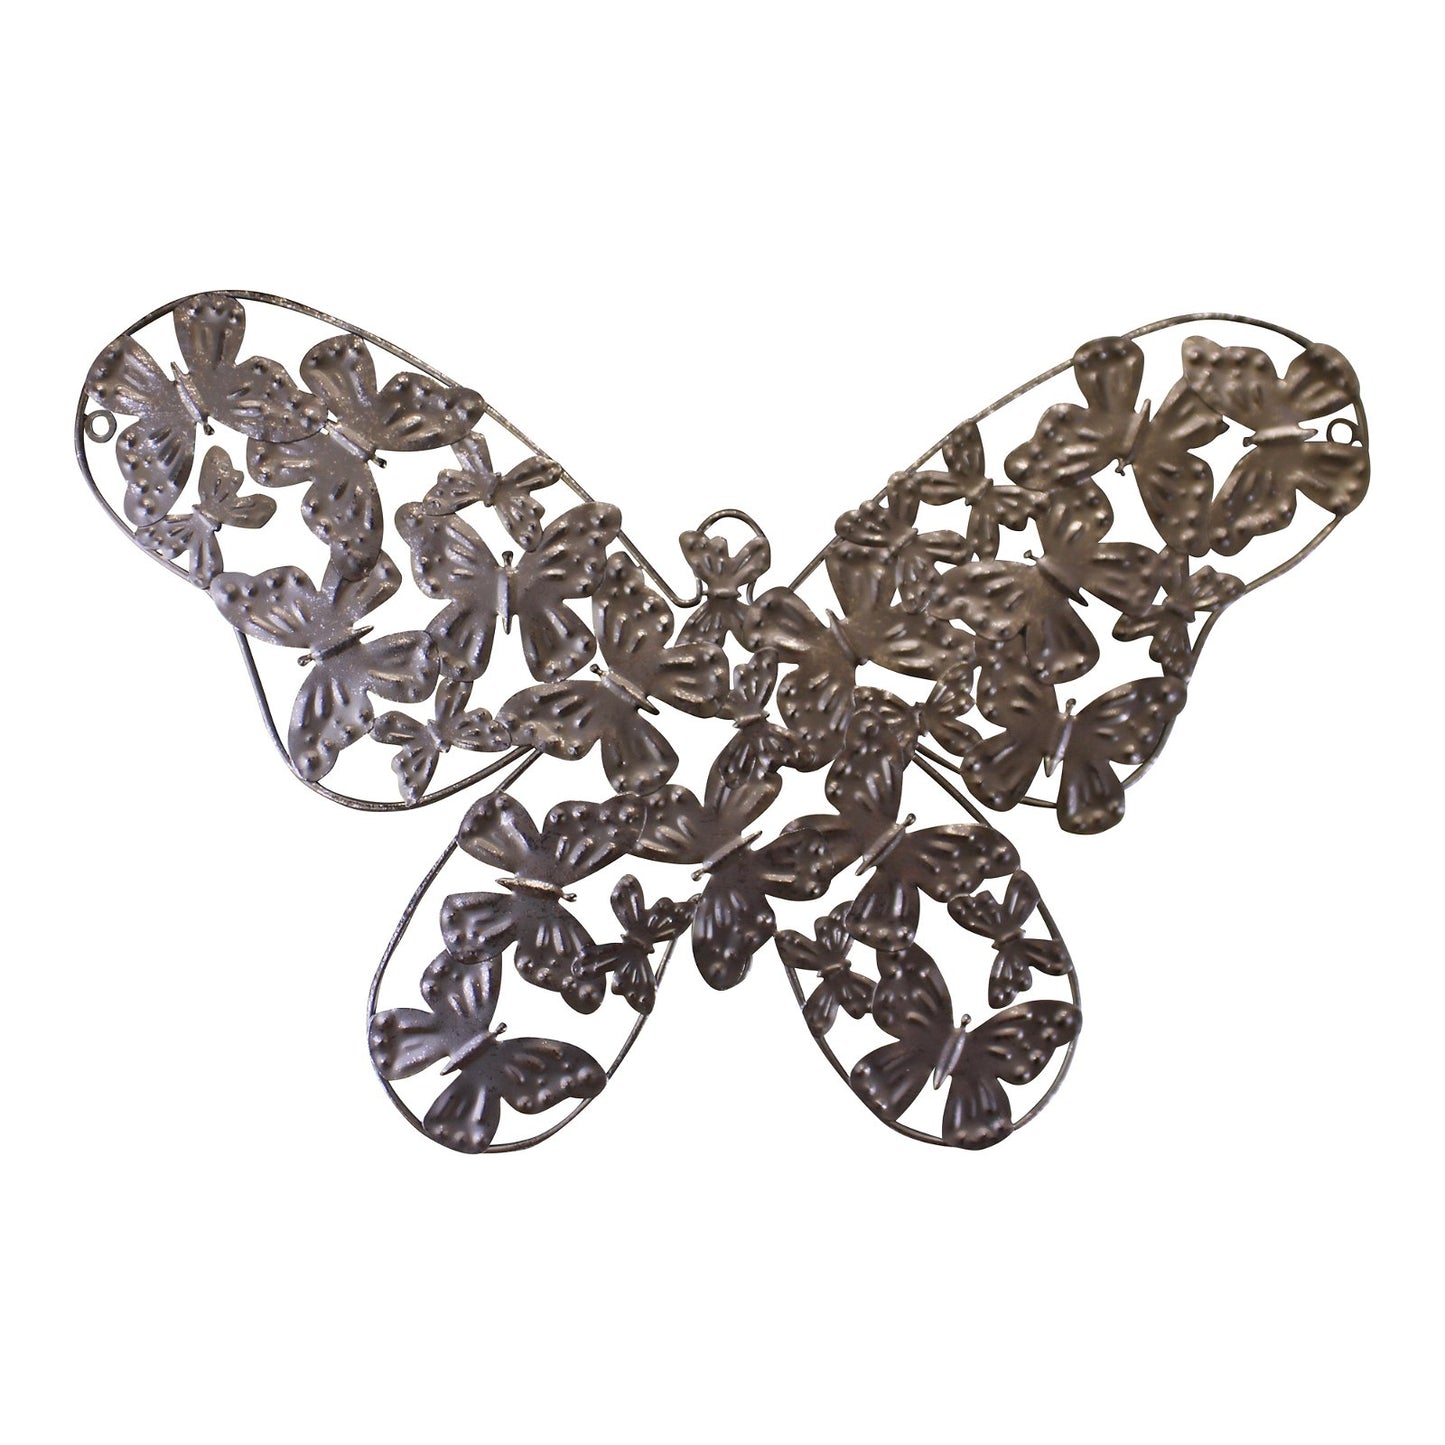 Small Silver Metal Butterfly Design Wall Decor